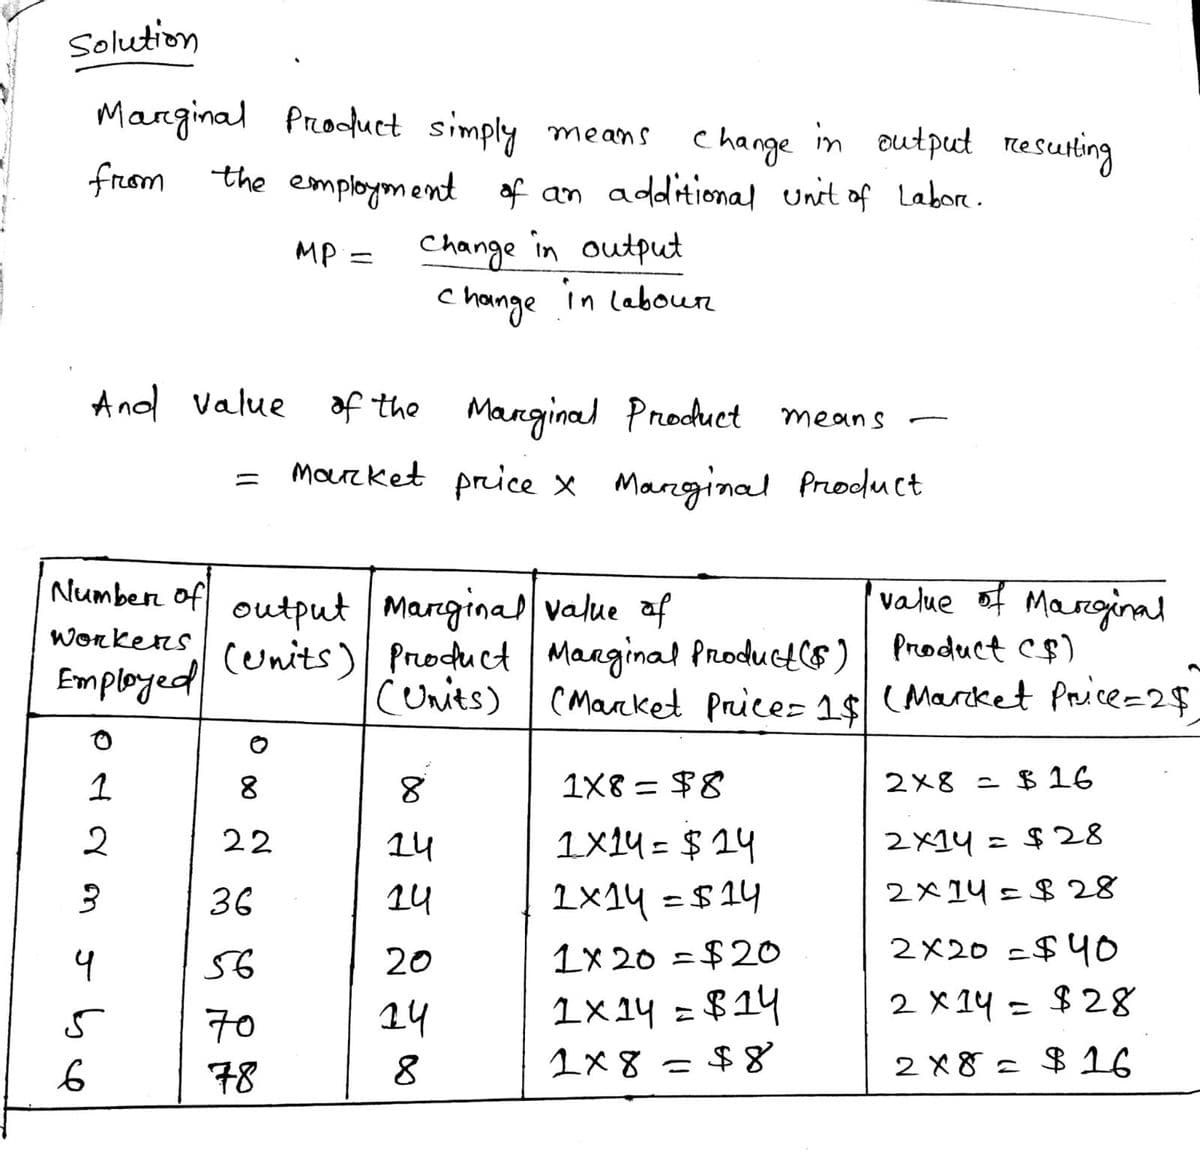 Solution
Marginal Product simply means
change in output resuting
the employment af an additional unit of Labon .
from
Change in output
c hainge in laboun
MP =
And value
of the Manginal Product means
marcket price × Marginal Product
Numben of output Manginal value af
value of Marginal
Workens
Employed
conits) Product Maaginal Product$)| Product )
(Marcket Price=2$
cunits) (Maket Prices 1$
1.
8.
1X8 = $8
2x8 = $ 16
2
22
14
1x14= $14
2x14 = $28
36
14
2×14 = $14
2x14=$28
56
20
1x 20 =$2O
2X20 =$40
70
14
1x14 = $14
2 X14 = $28
78
1x8=$8
2 X8 = $ 16
